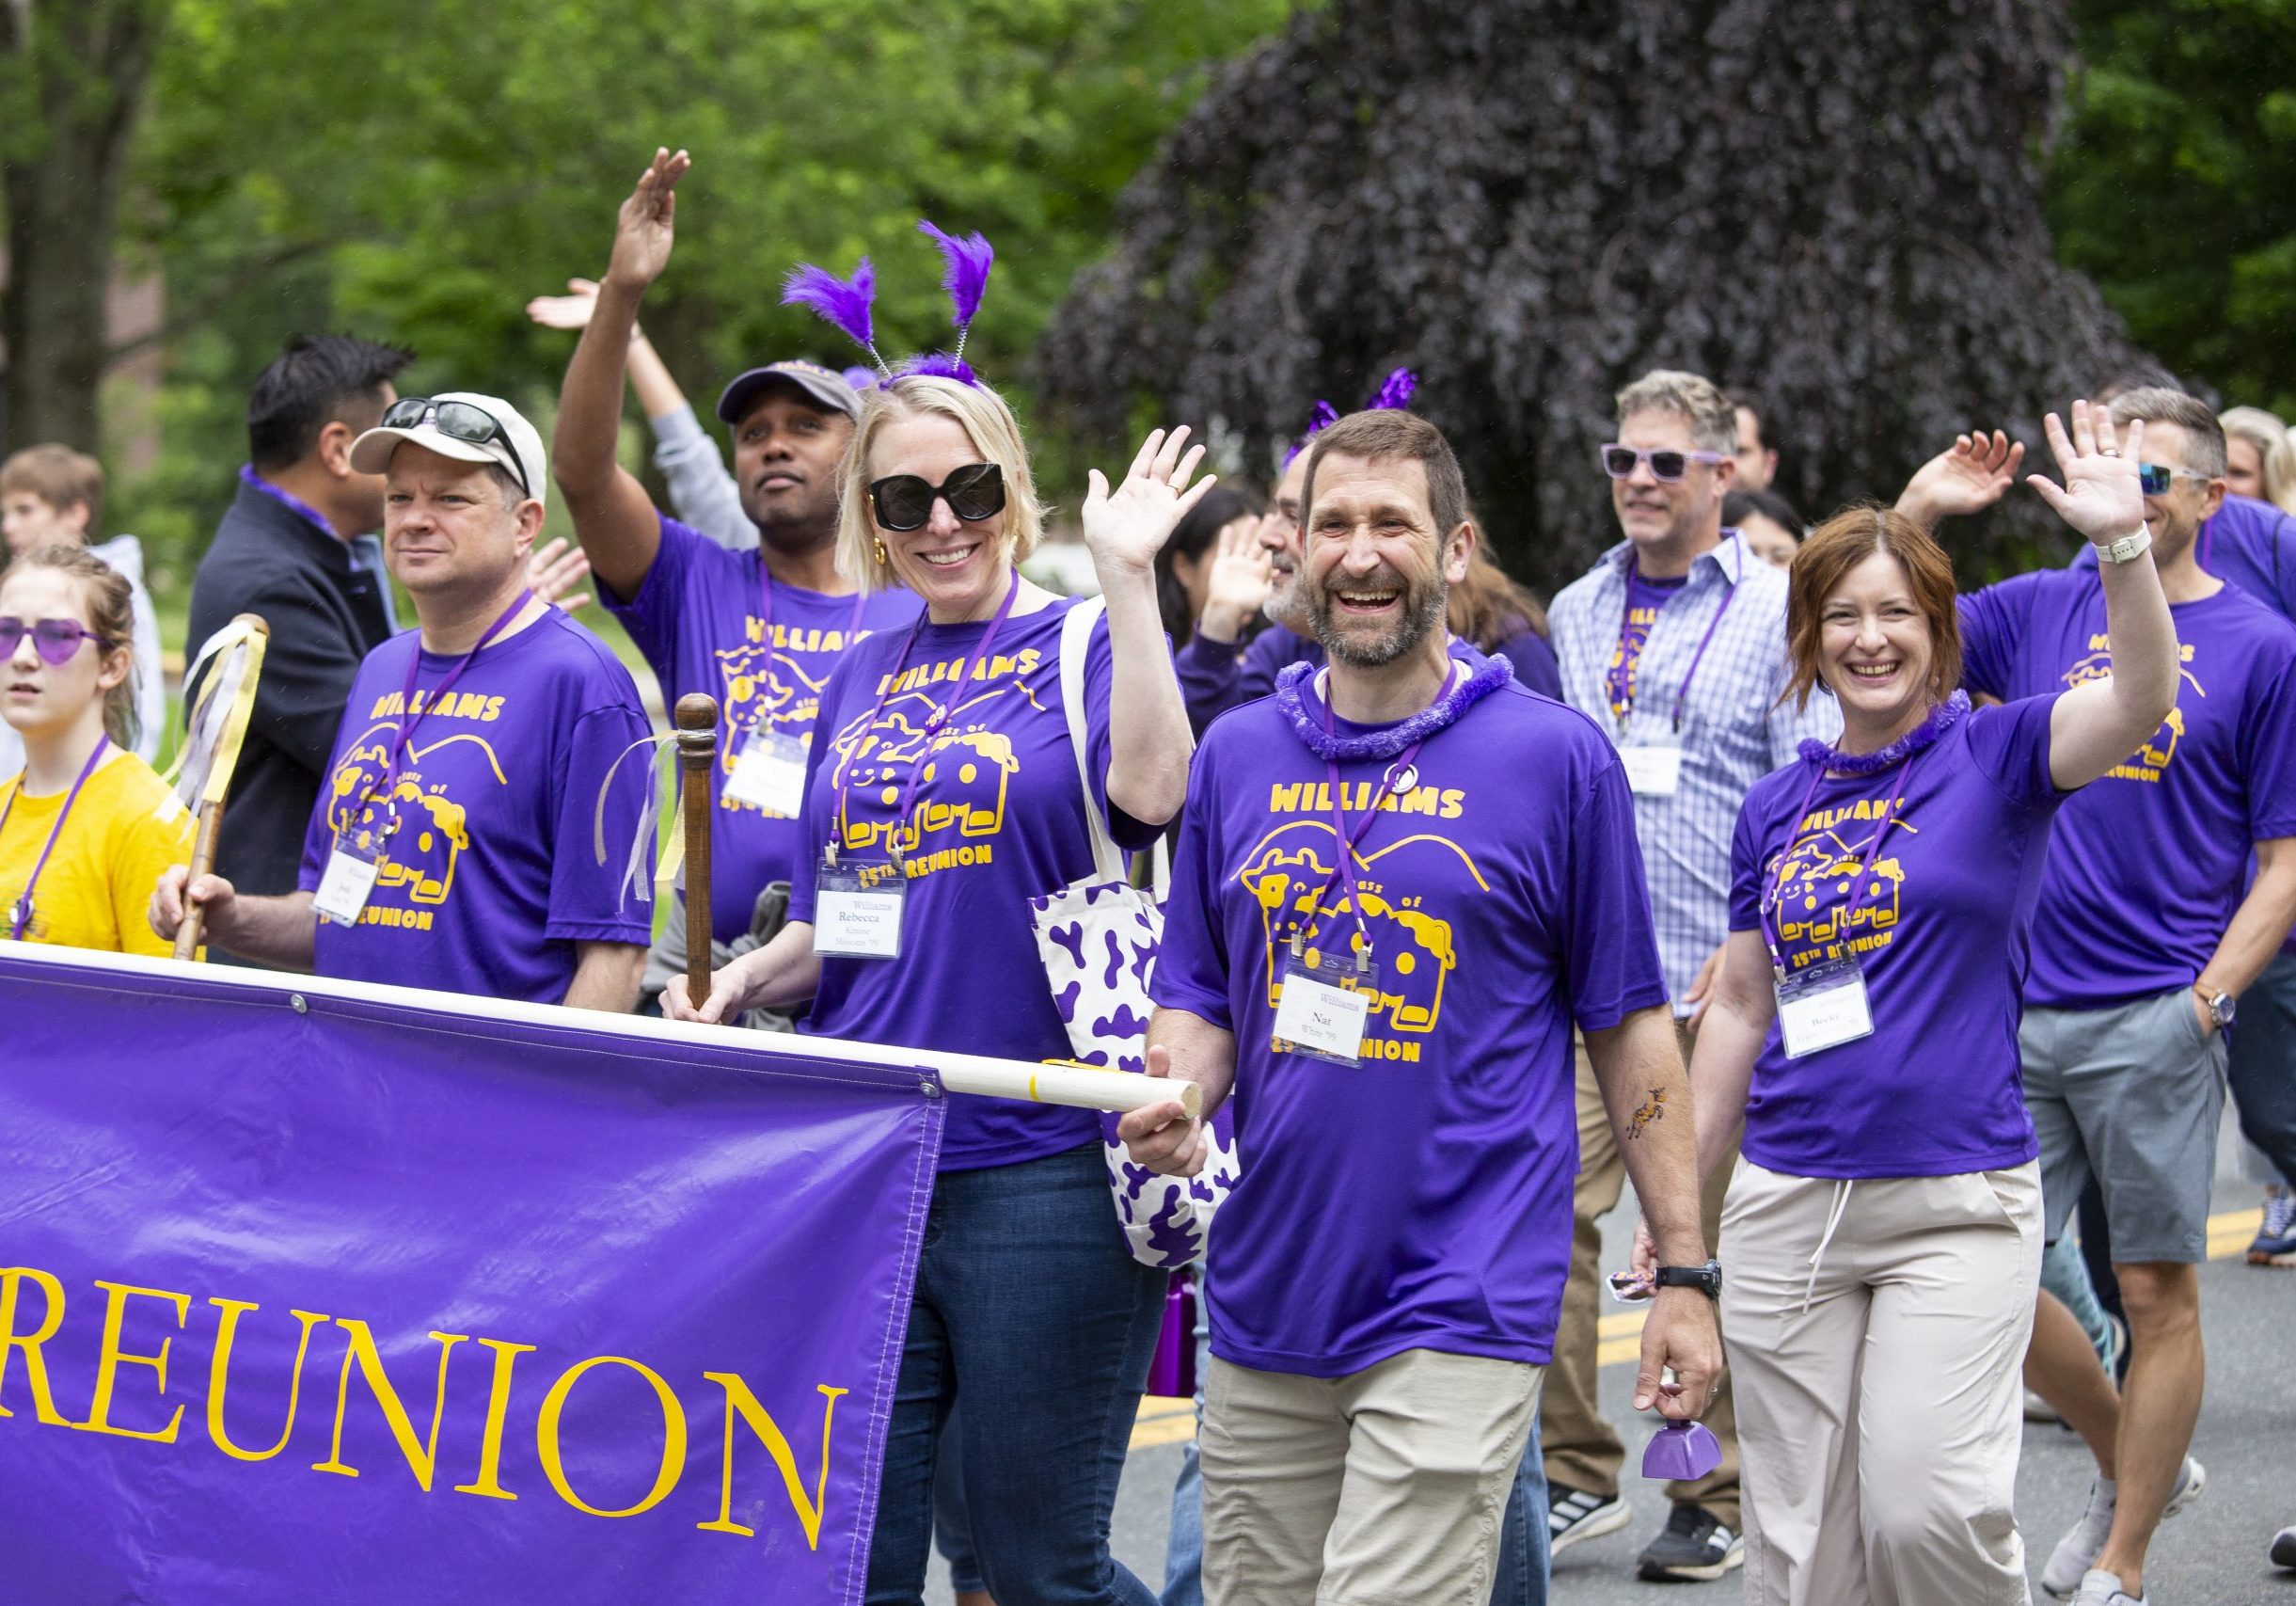 A group of people in purple shirts smile as they hold and Reunion banner and walk in a parade during their college reunion weekend.